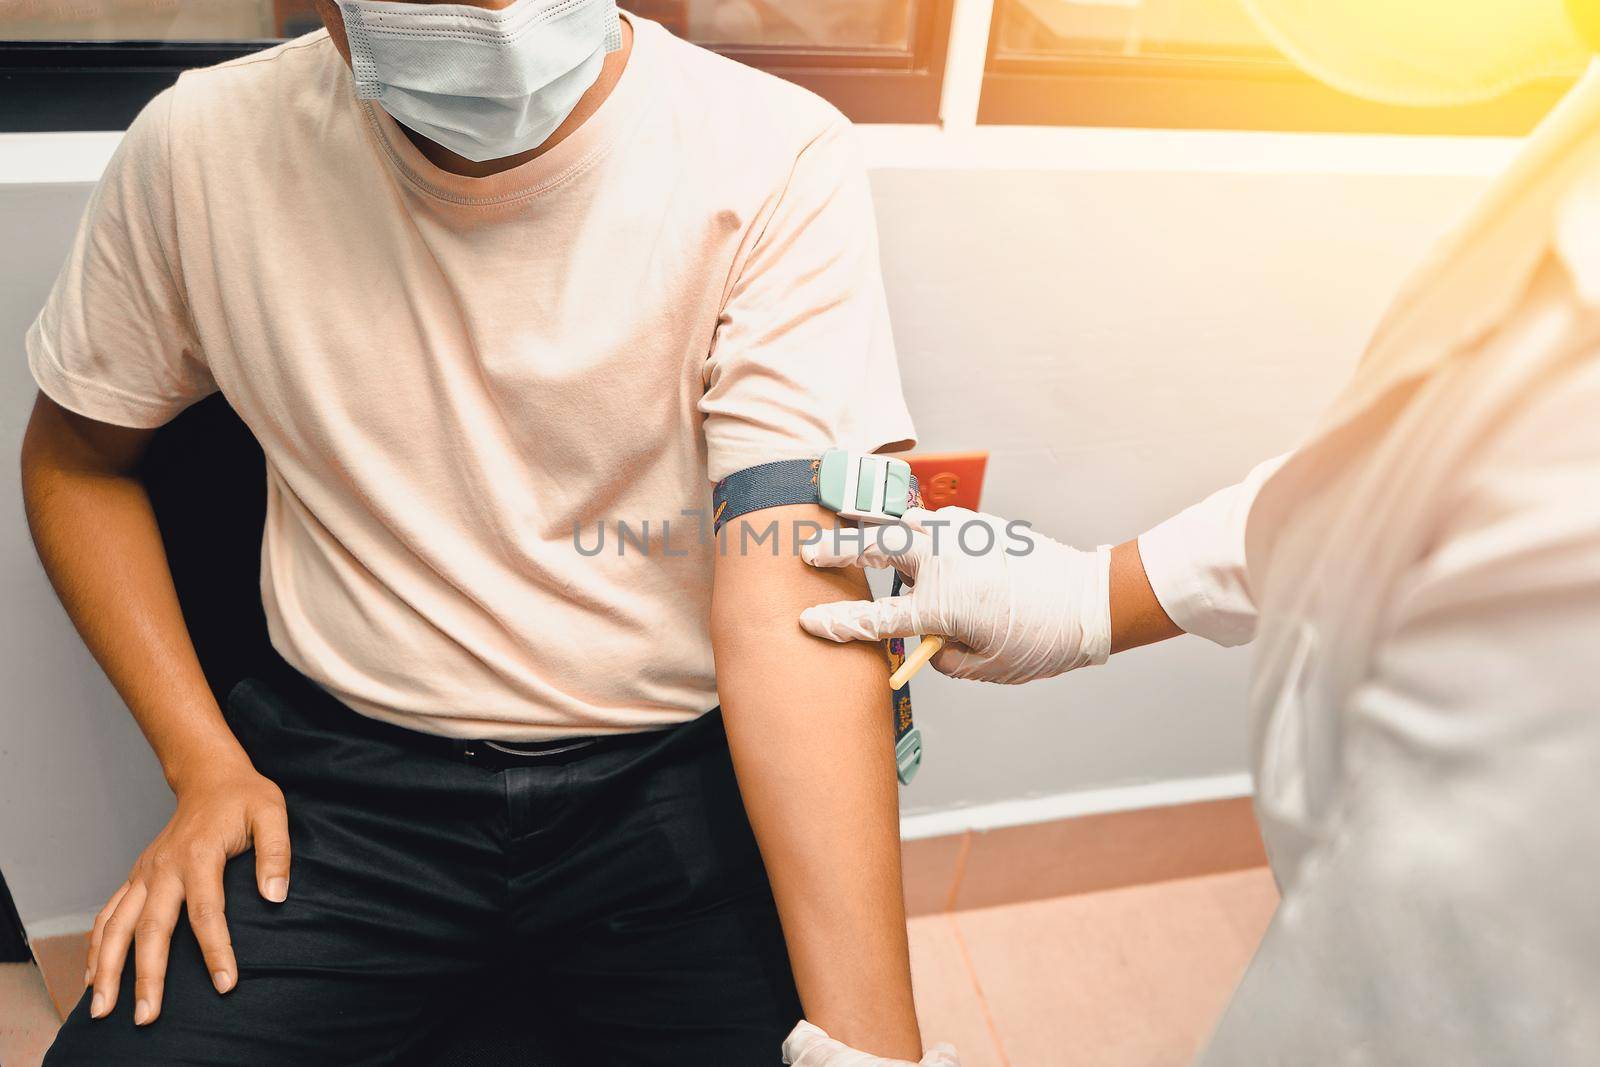 Latin young man taking a blood sample in a hospital by cfalvarez